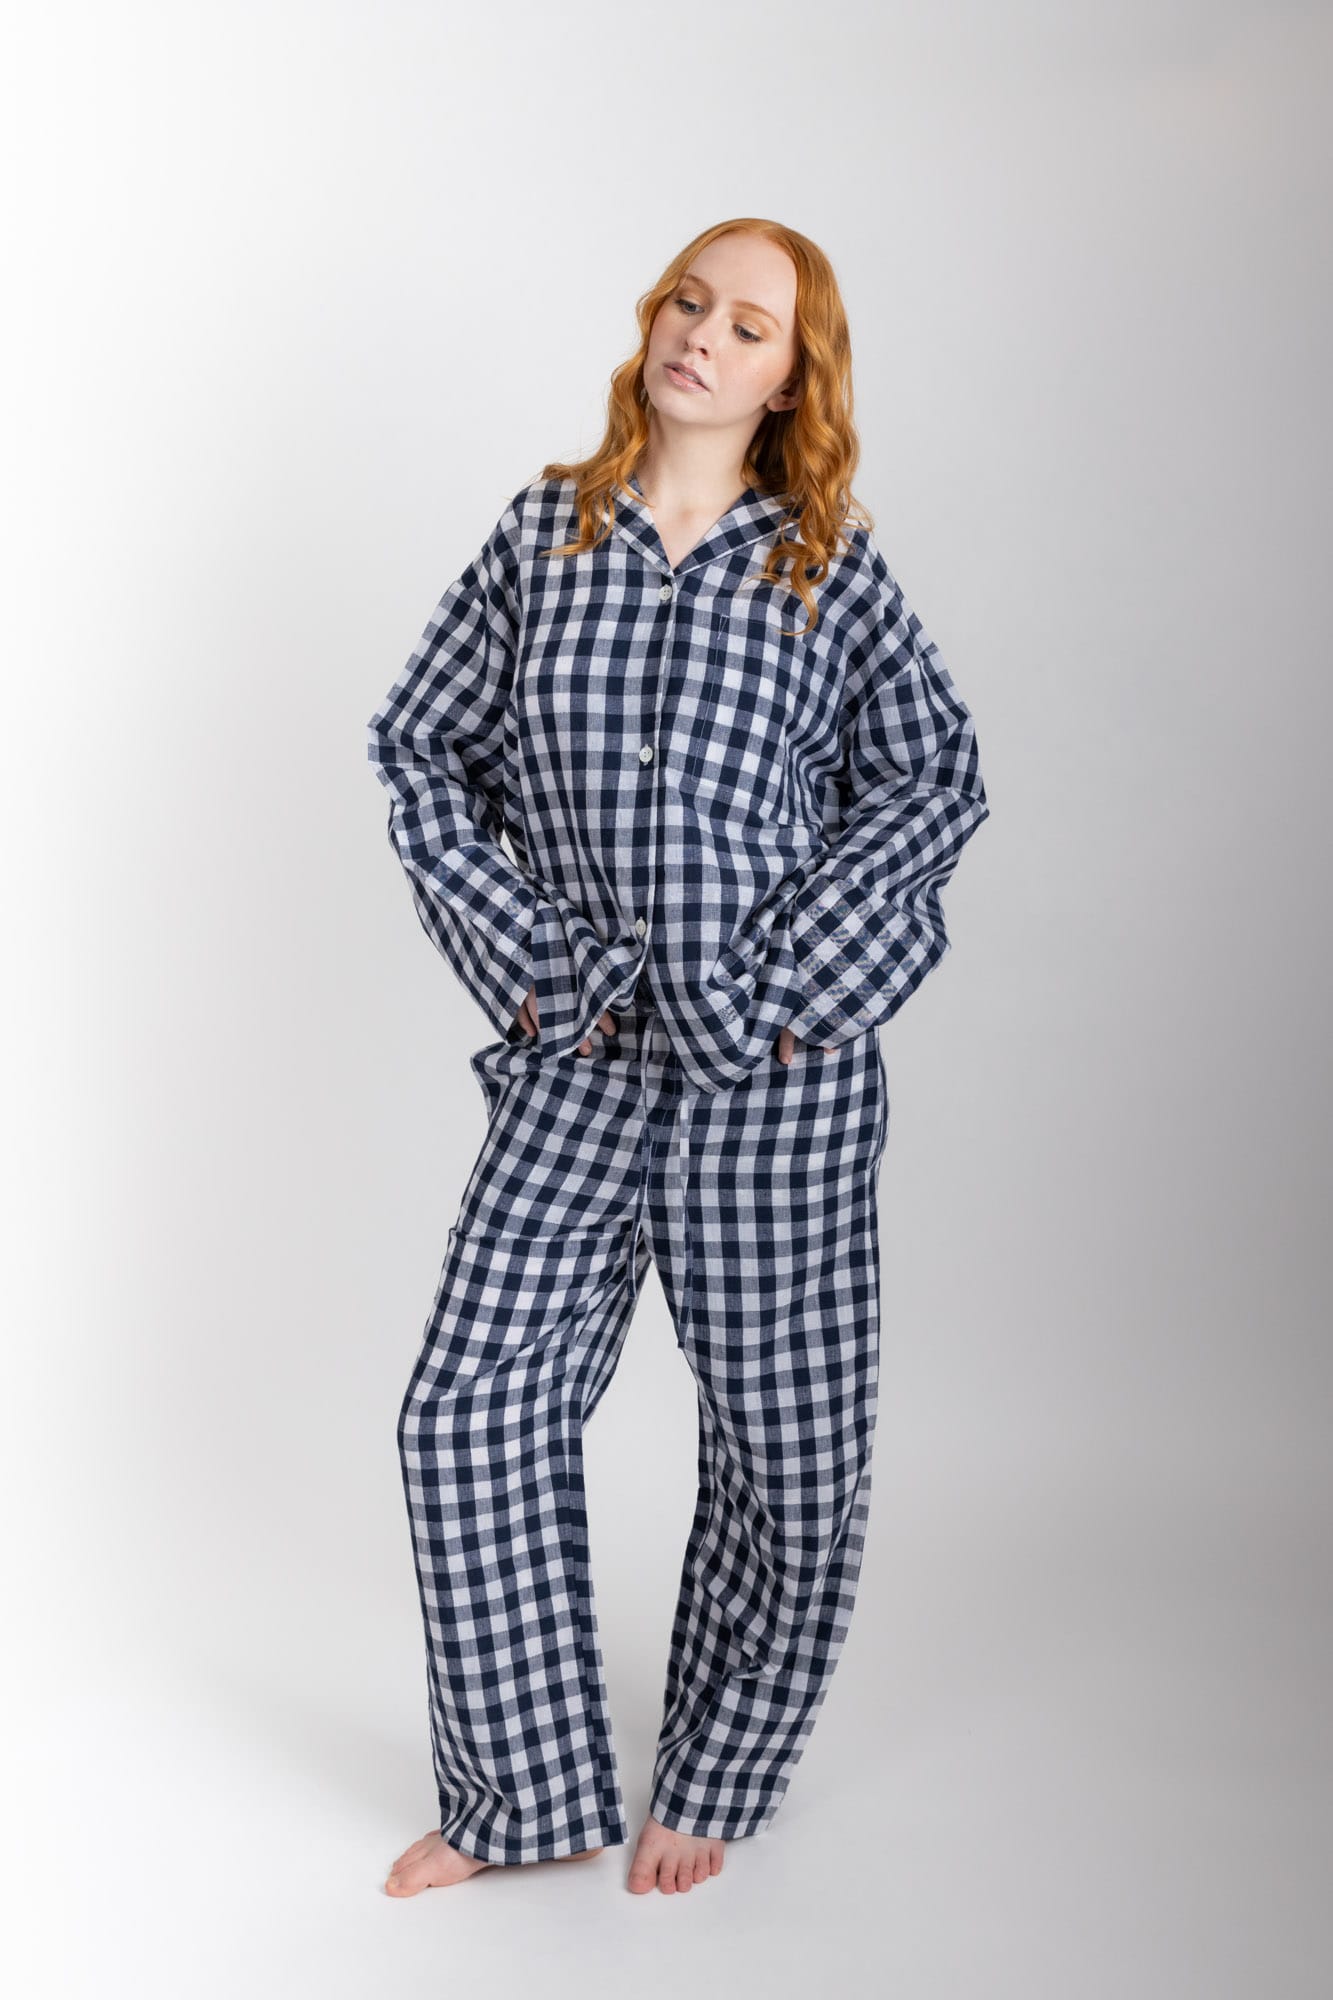 Women’s sleepwear set featuring an oversized, dropped-shoulder, button-through shirt, with natural shell buttons.  The loose-fit, straight-leg pants have an elasticated waist, flat front, and drawstring detail, and are comfortable and flattering. Made from an organic cotton and linen blend, in a navy and white check, both pieces have been finished with French seams.